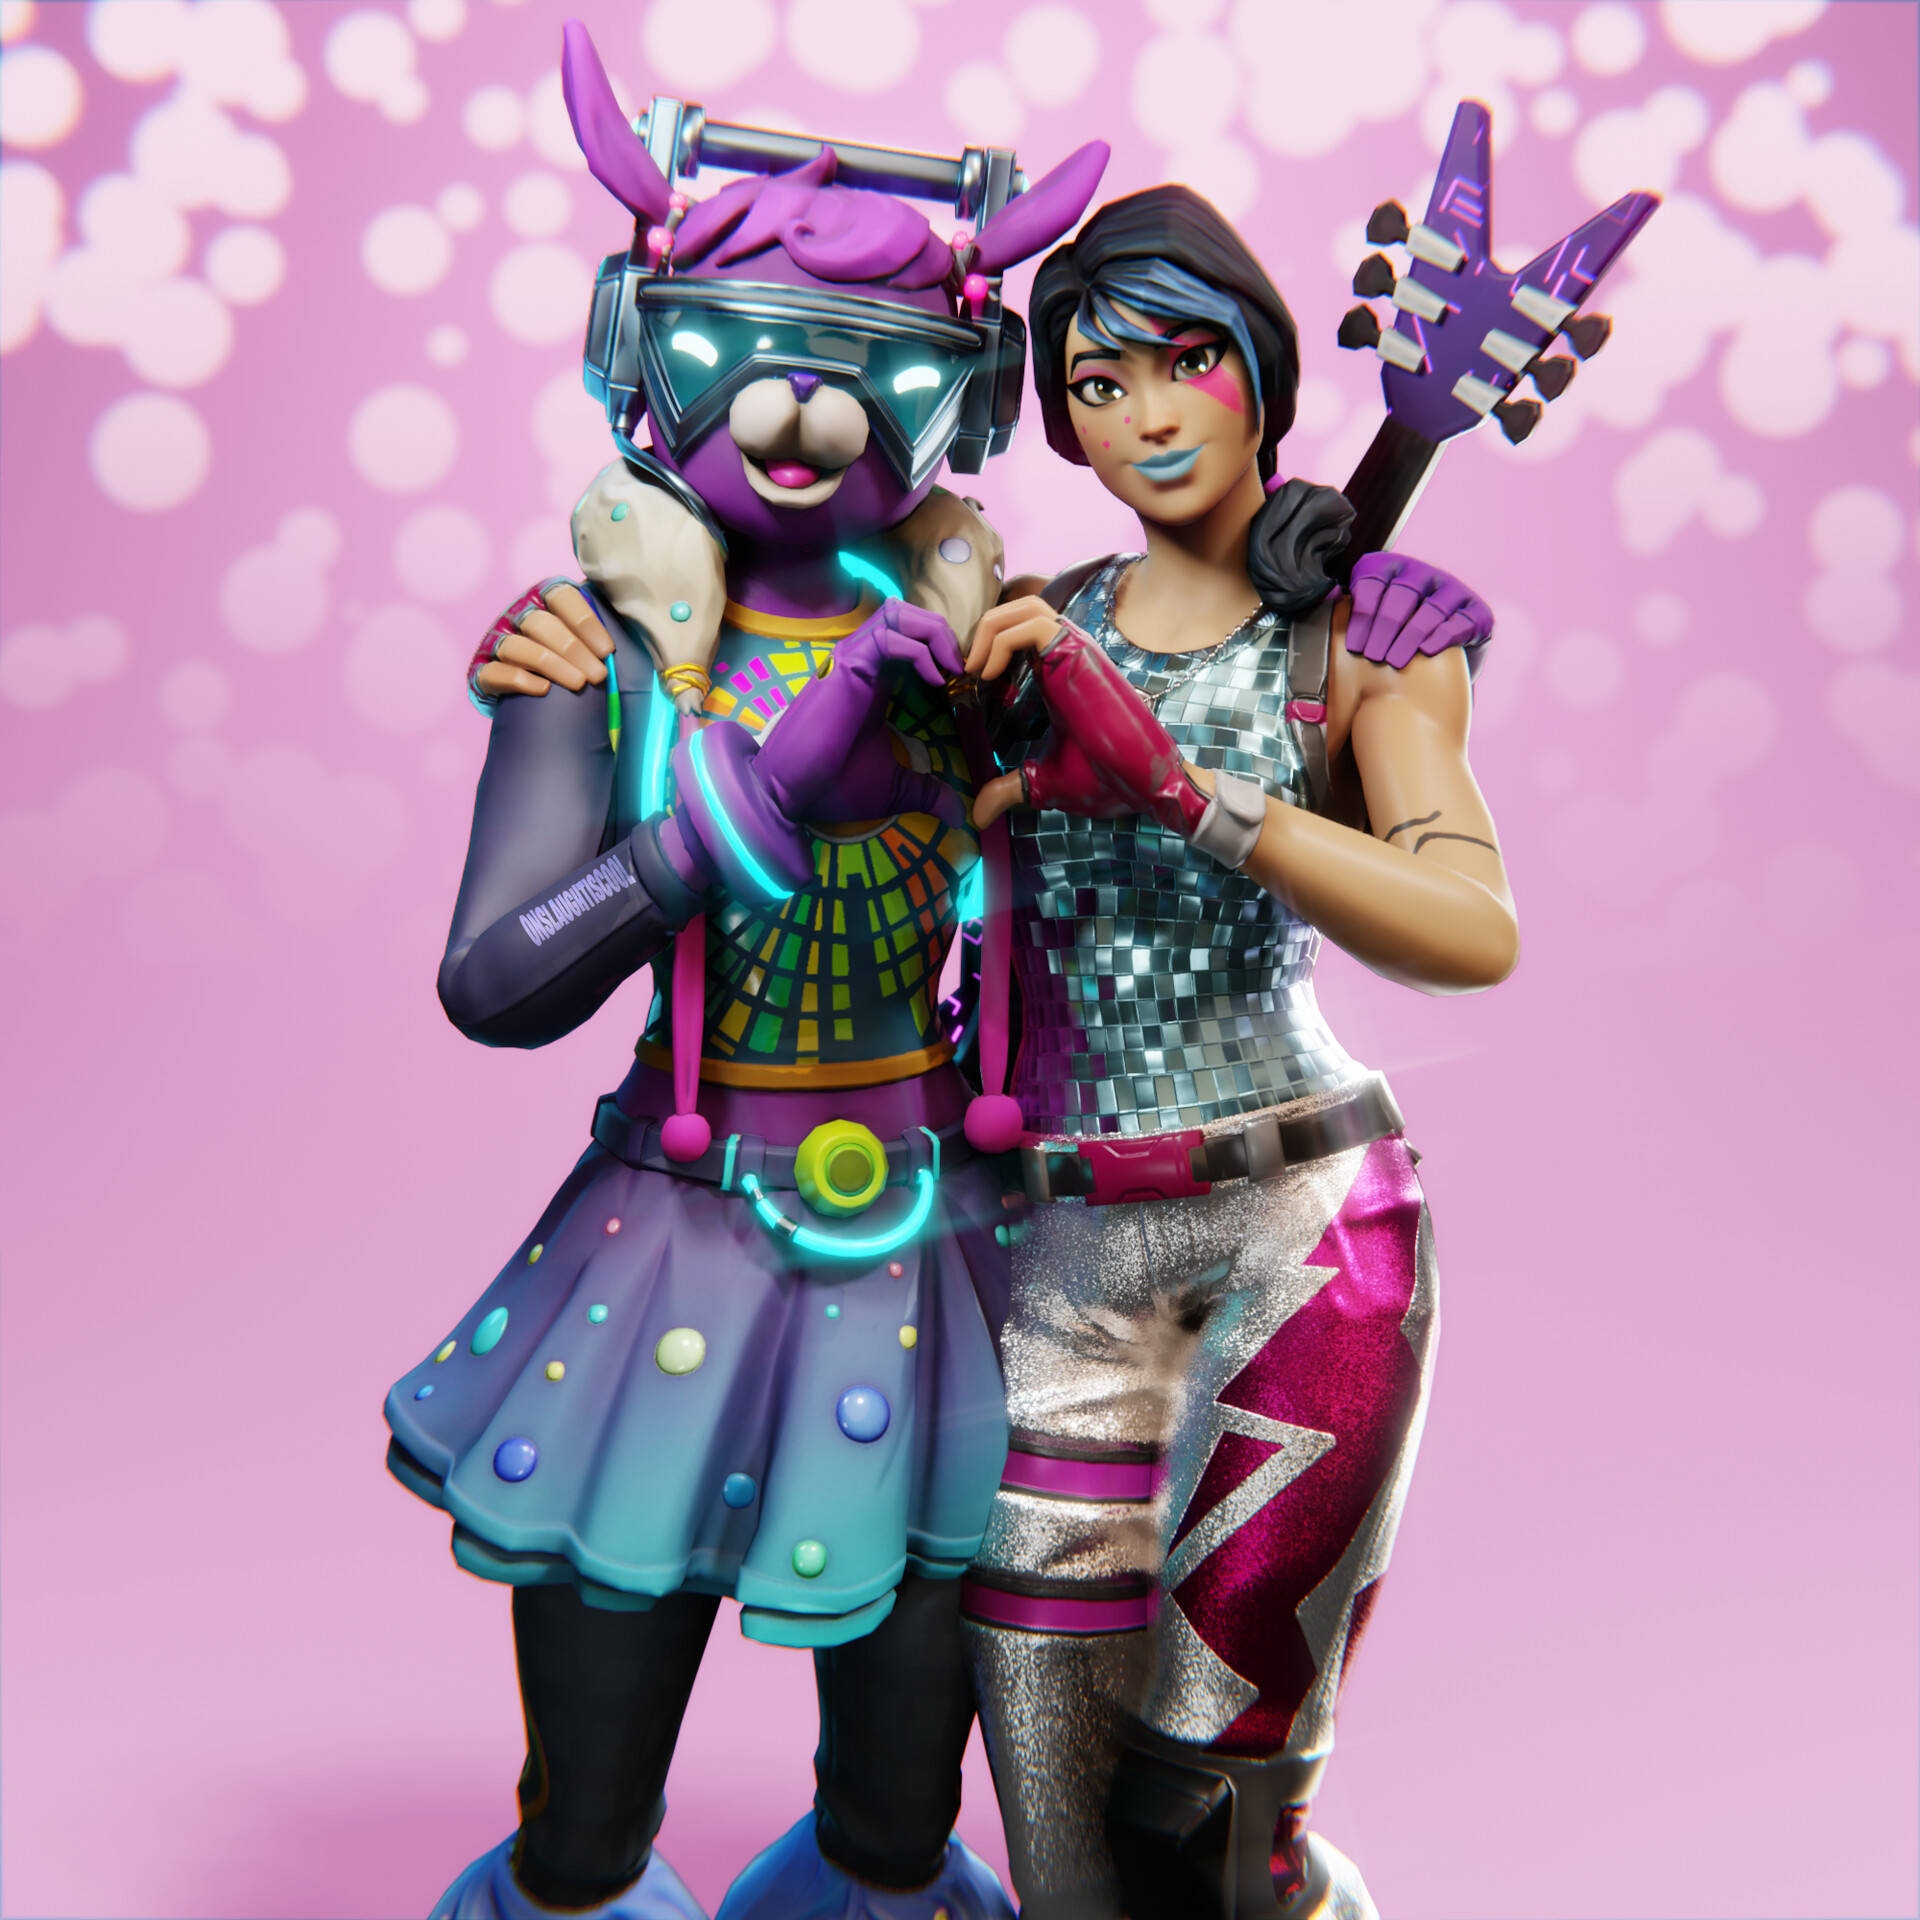 "Make your Fortnite dreams a reality with Sparkle Specialist Outfit!" Wallpaper